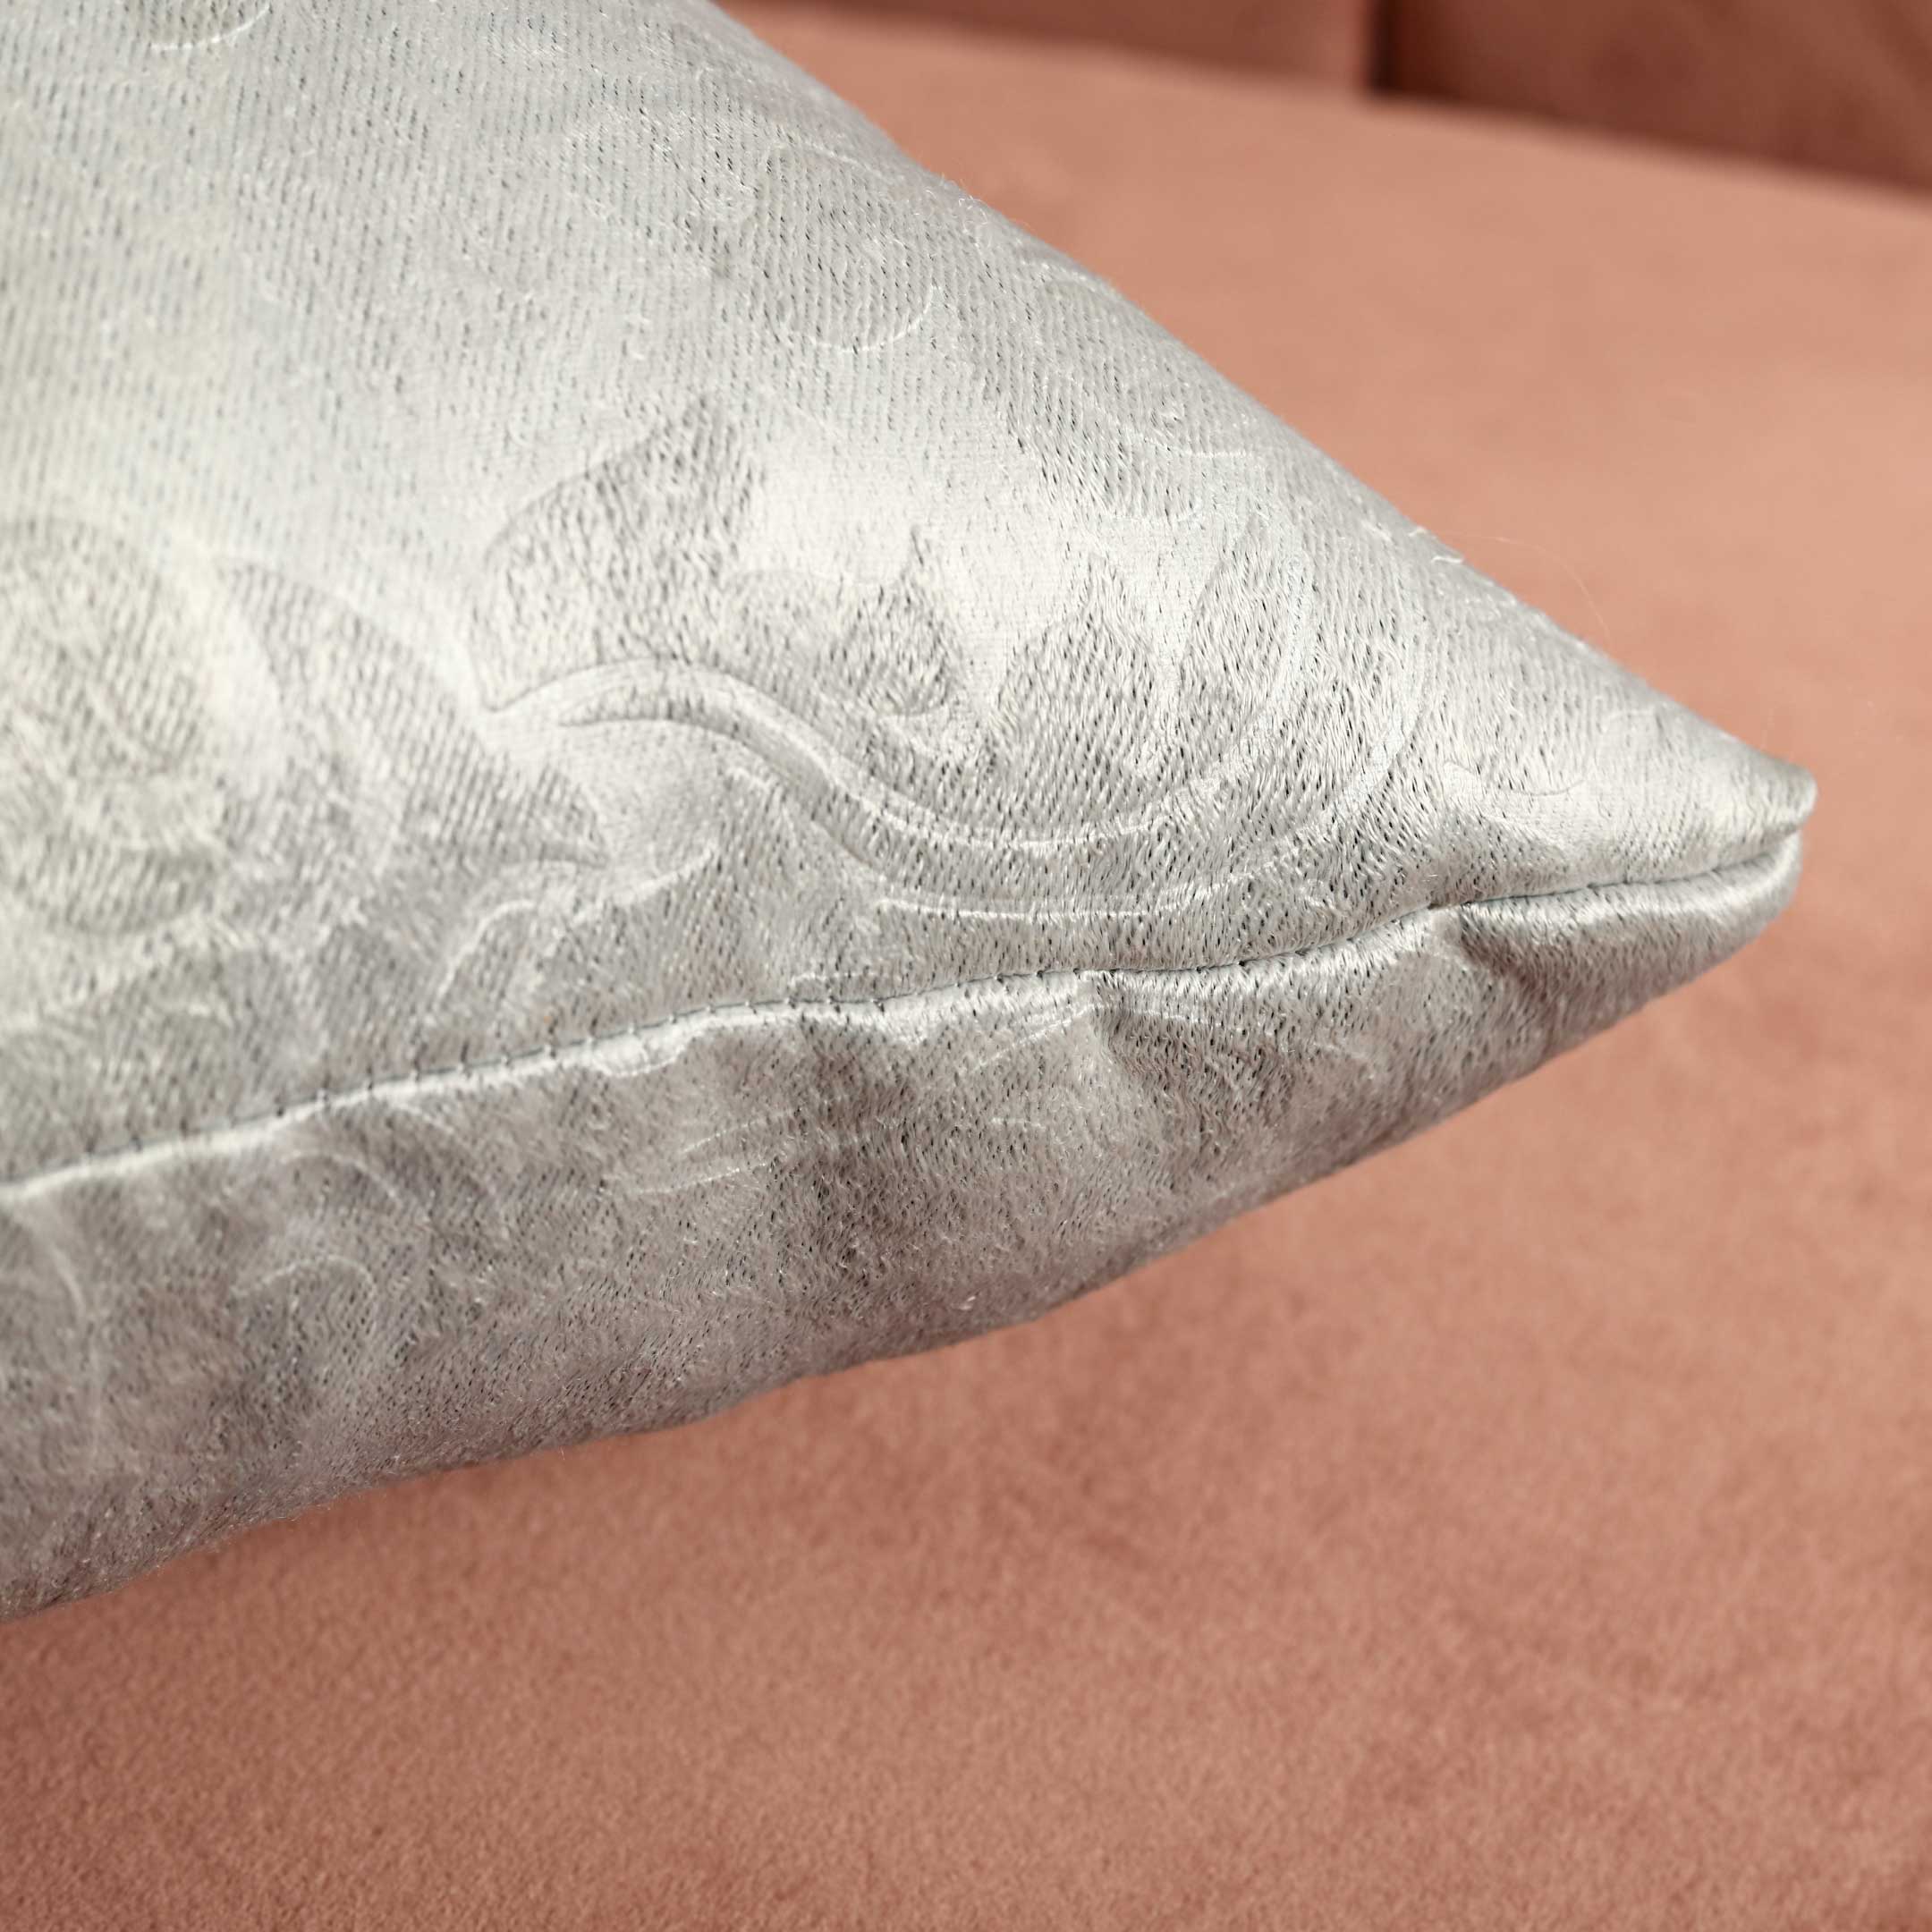 Weave Embossed Jacquard Cushion Cover Silver